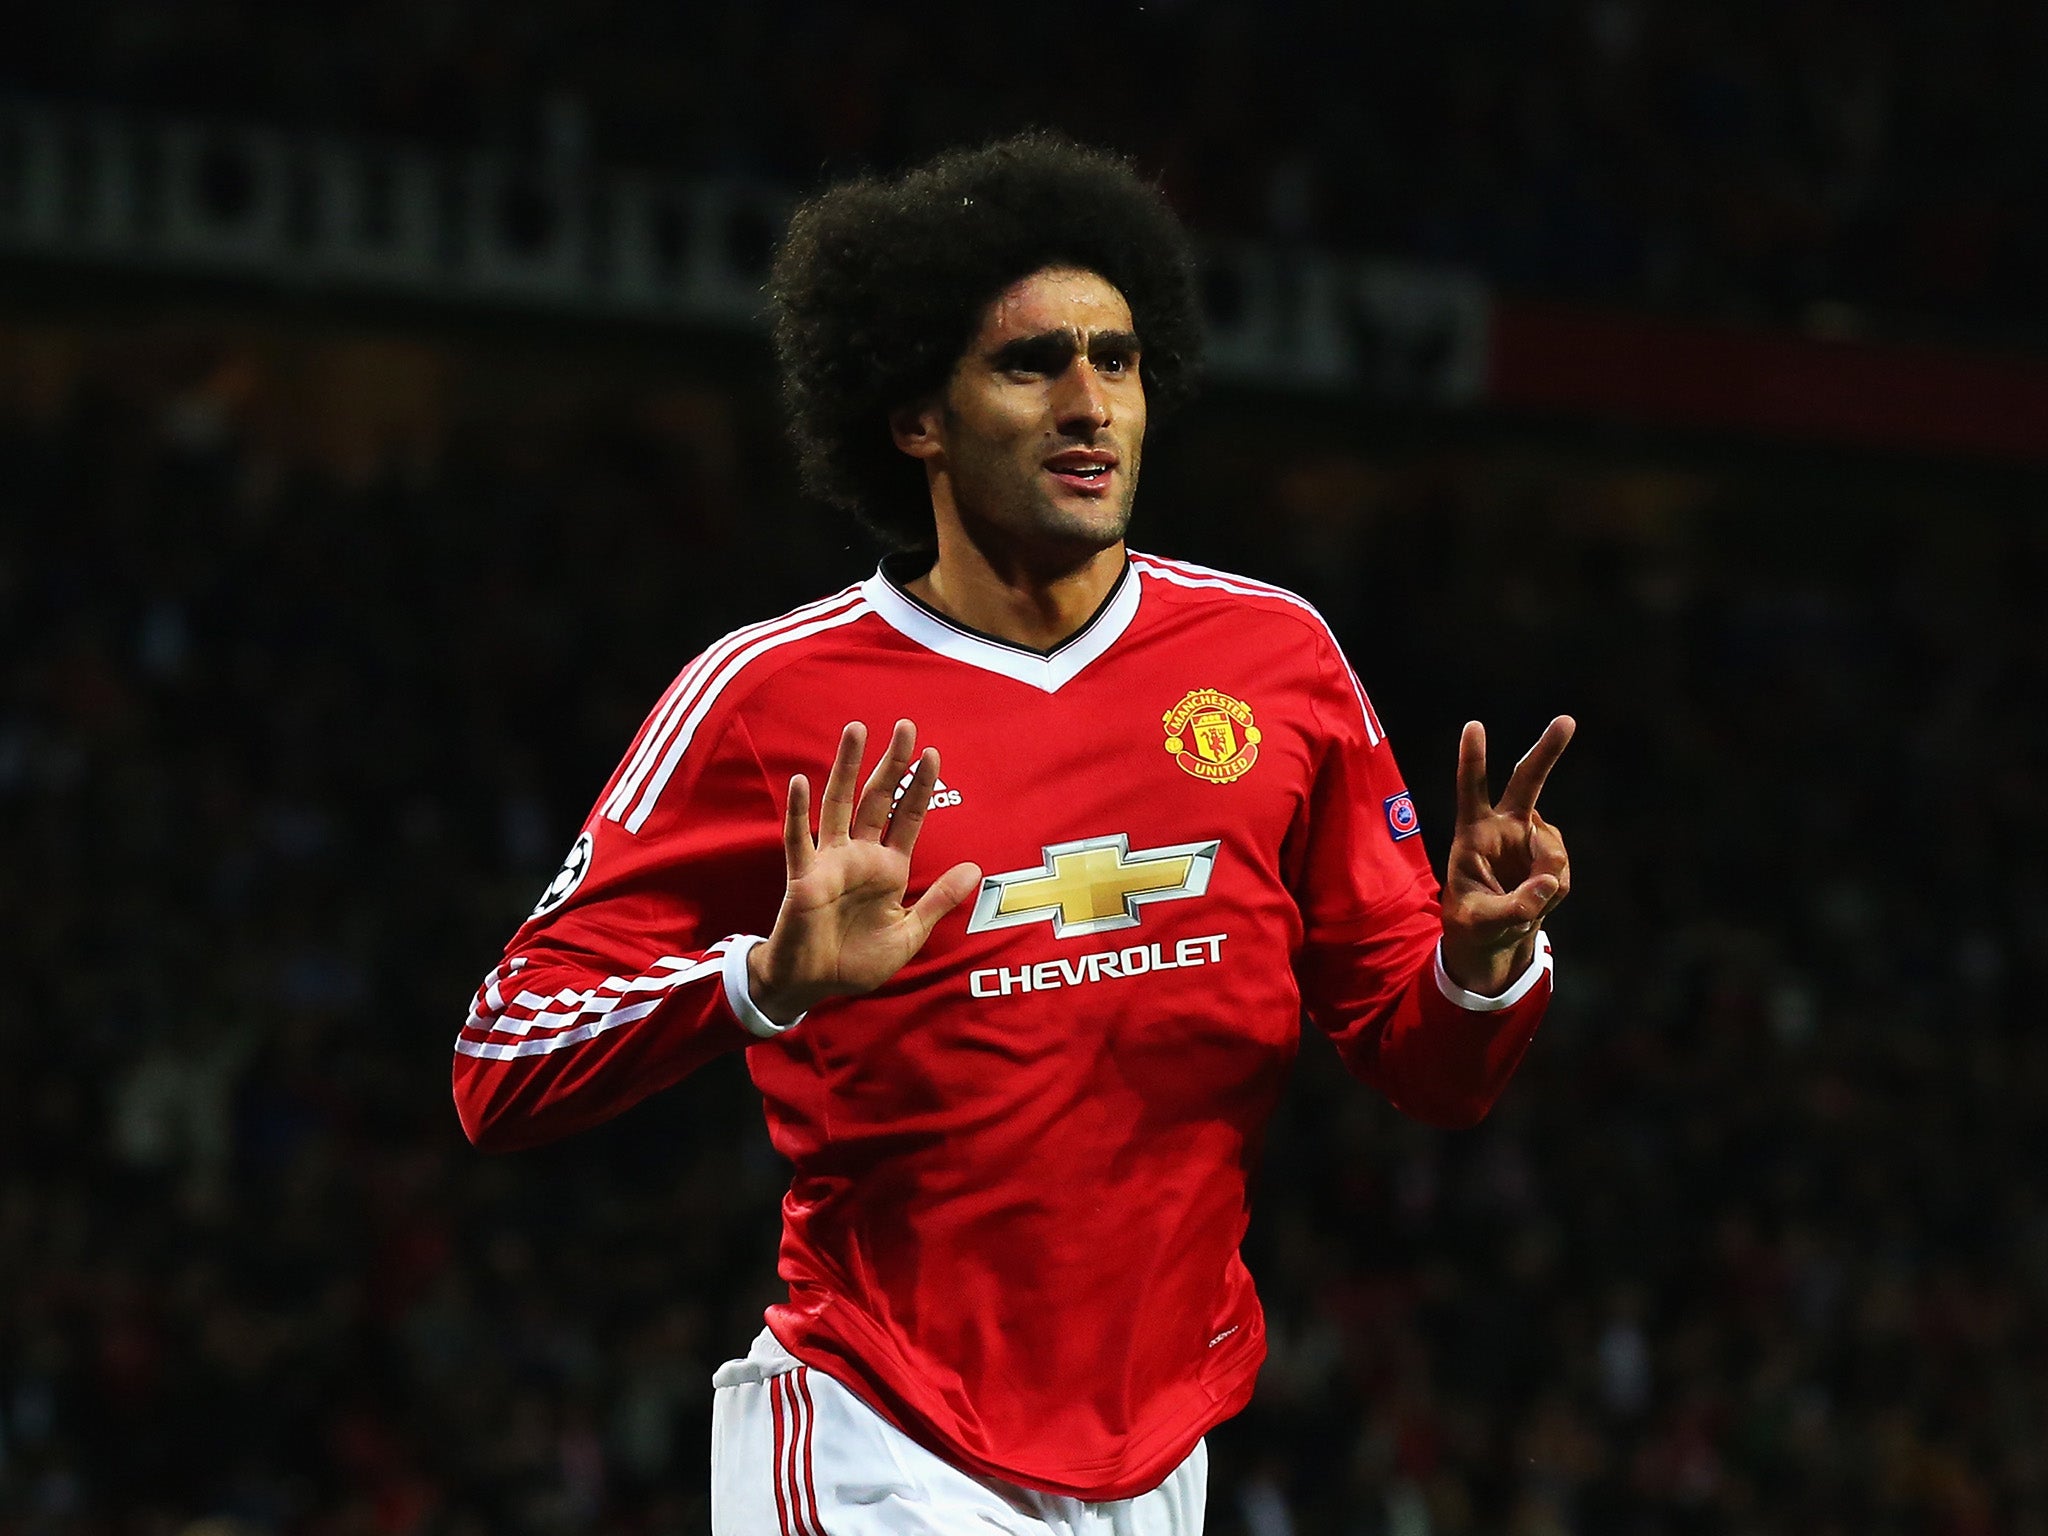 Marouane Fellaini is expected to start in Rooney's absence